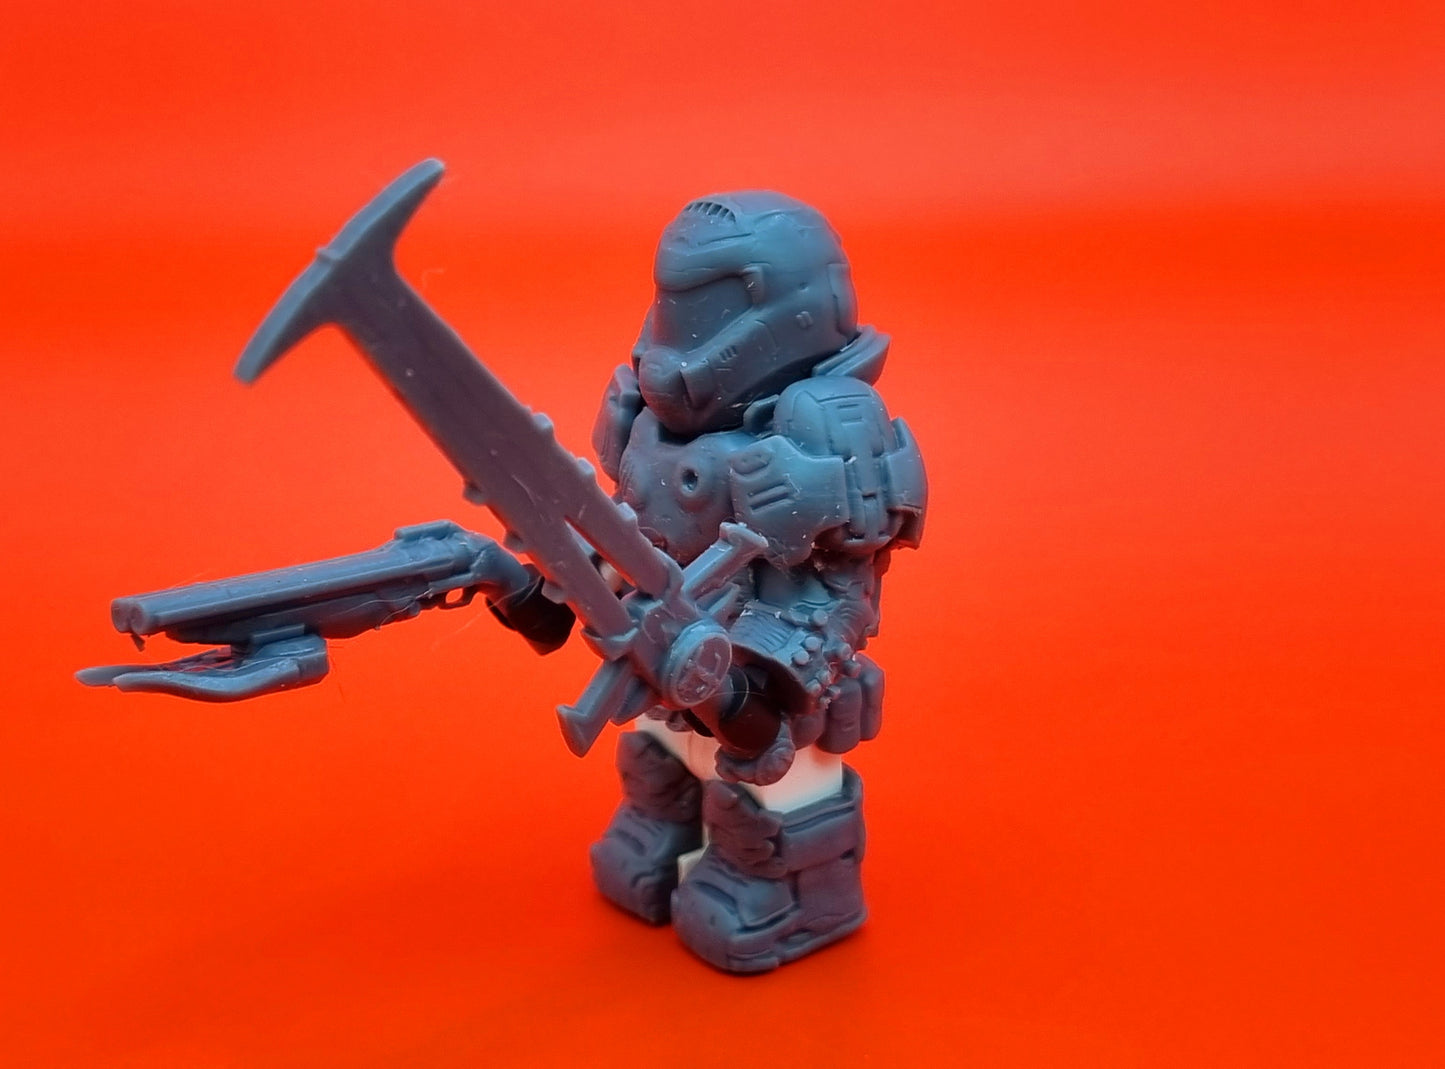 Building toy custom 3D printed game slayer!